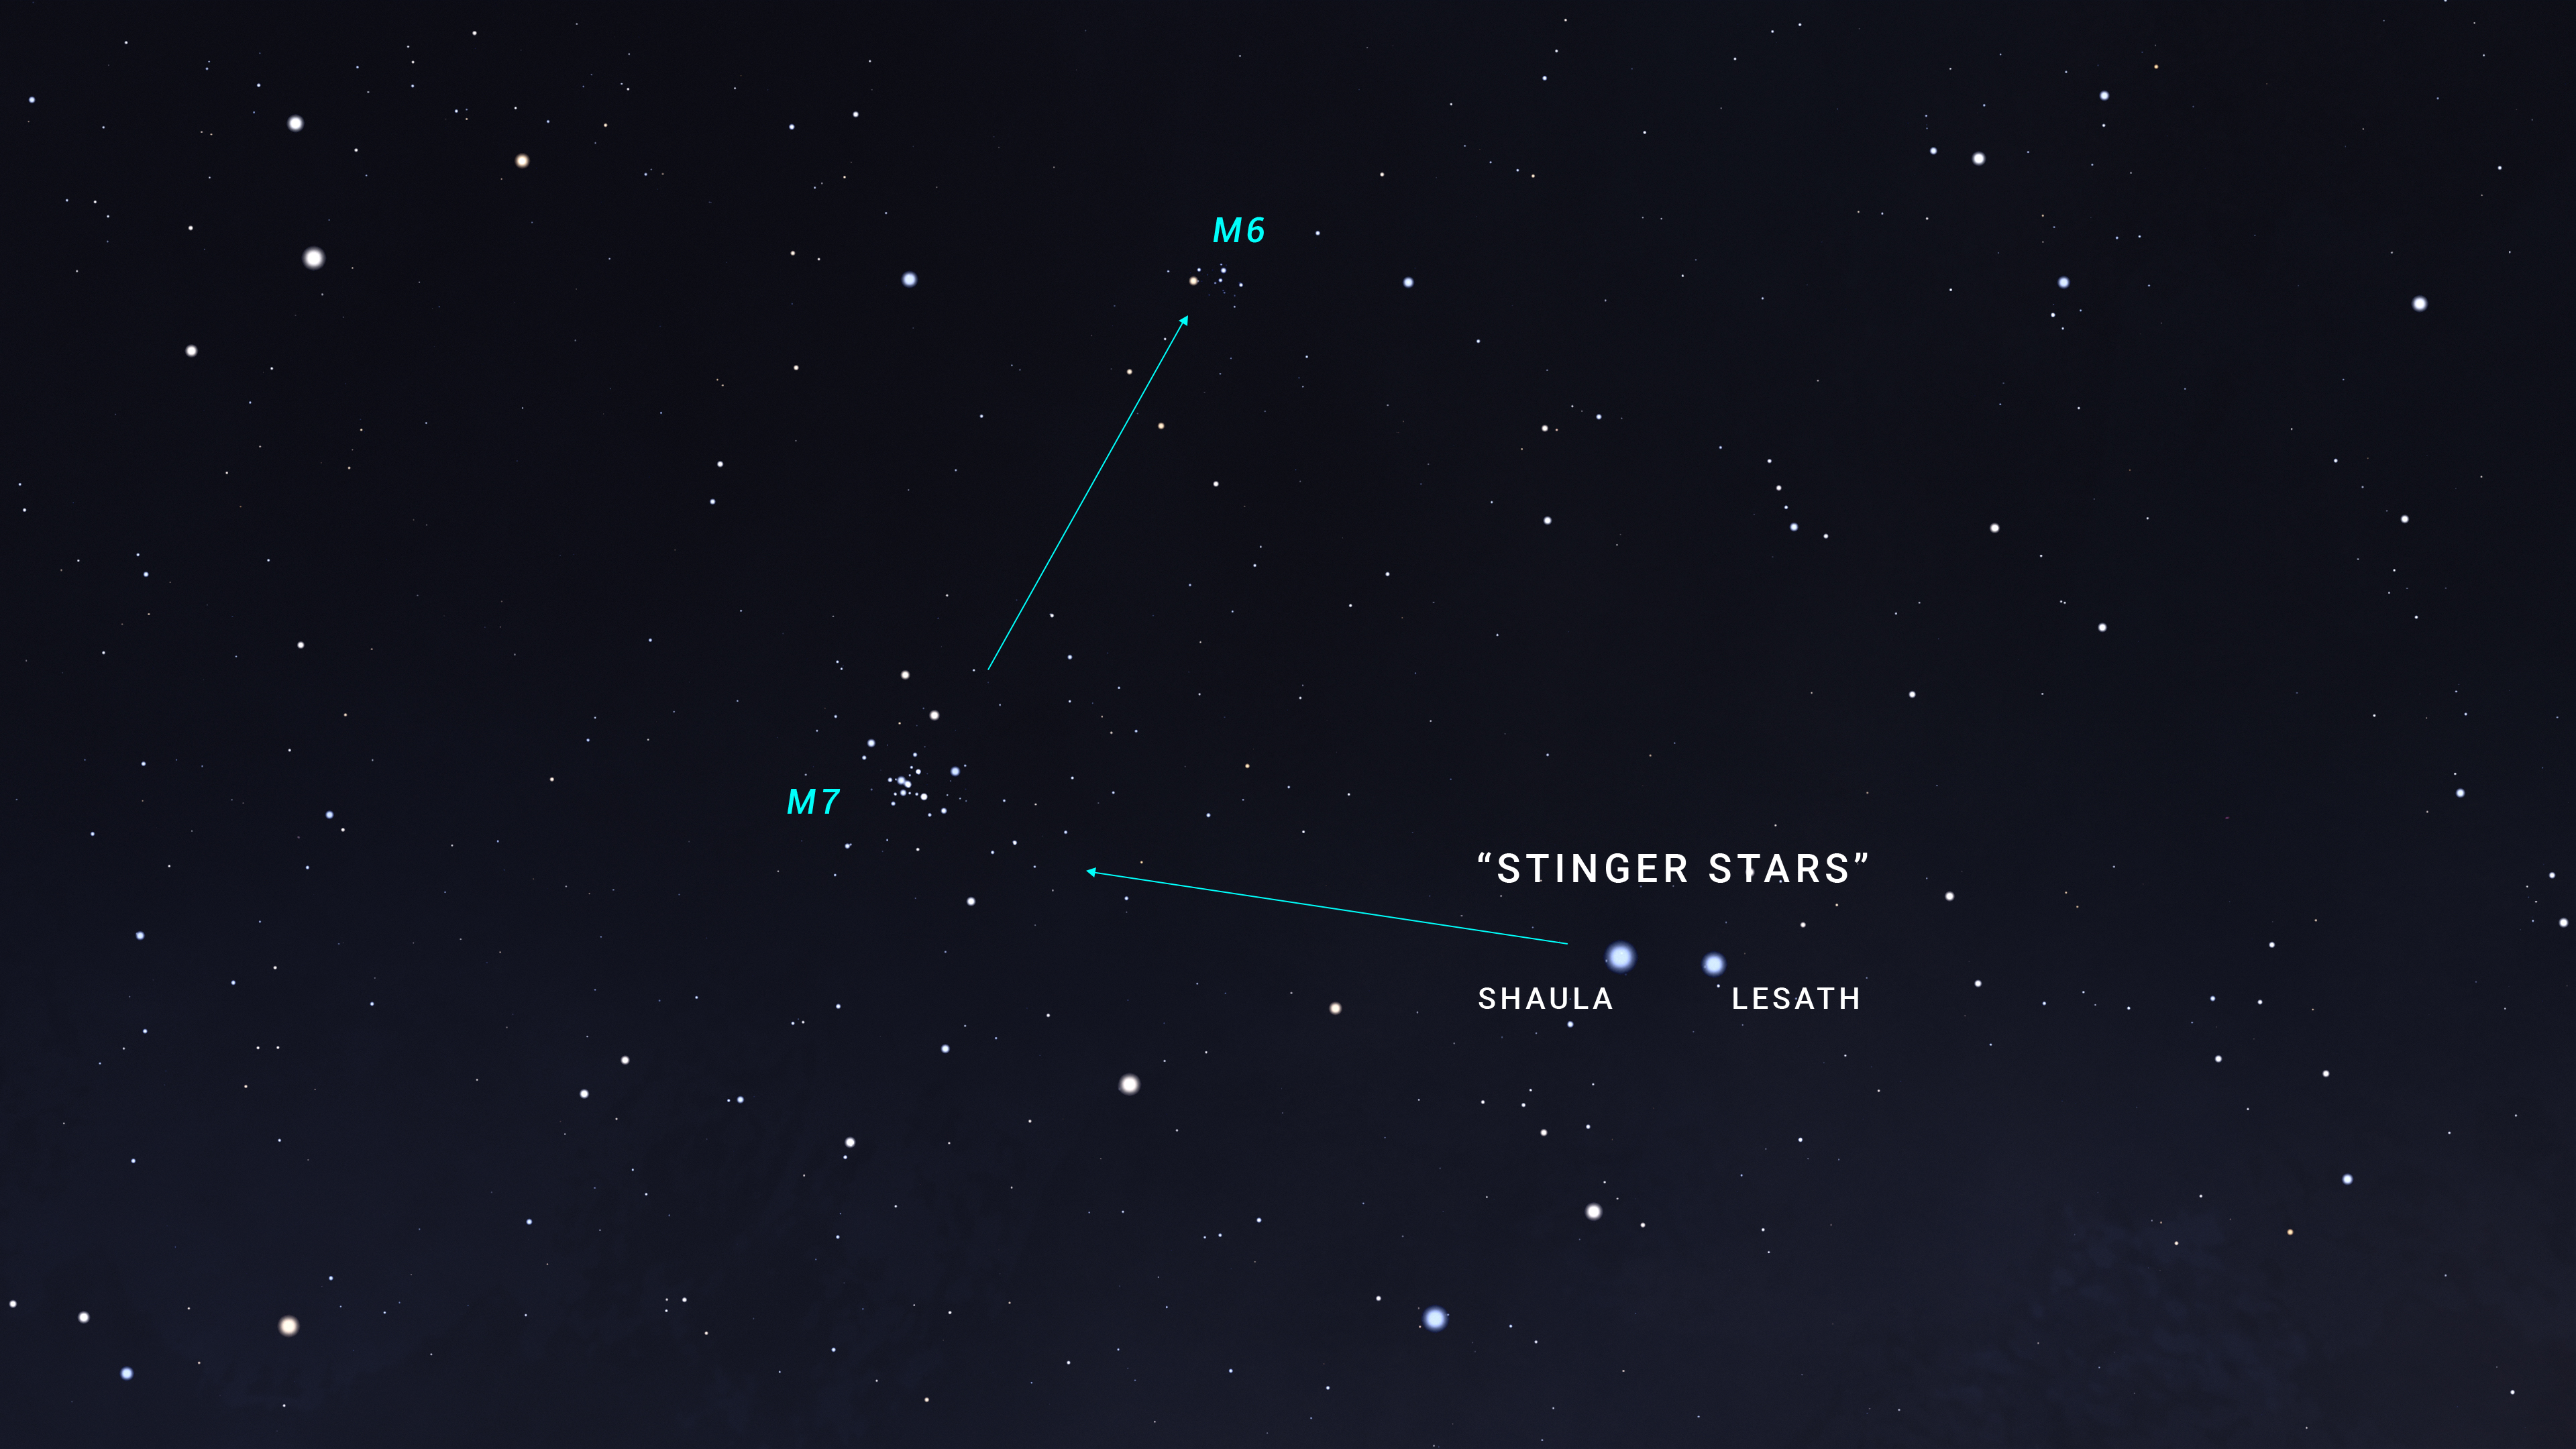 An illustrated sky chart shows a zoomed-in view, like what binoculars would reveal. Stinger stars Shaula and Lesath are labeled at right. An arrow drawn through these two stars points to the position of M7, while another arrow of about the same length points upward to the position of M6.